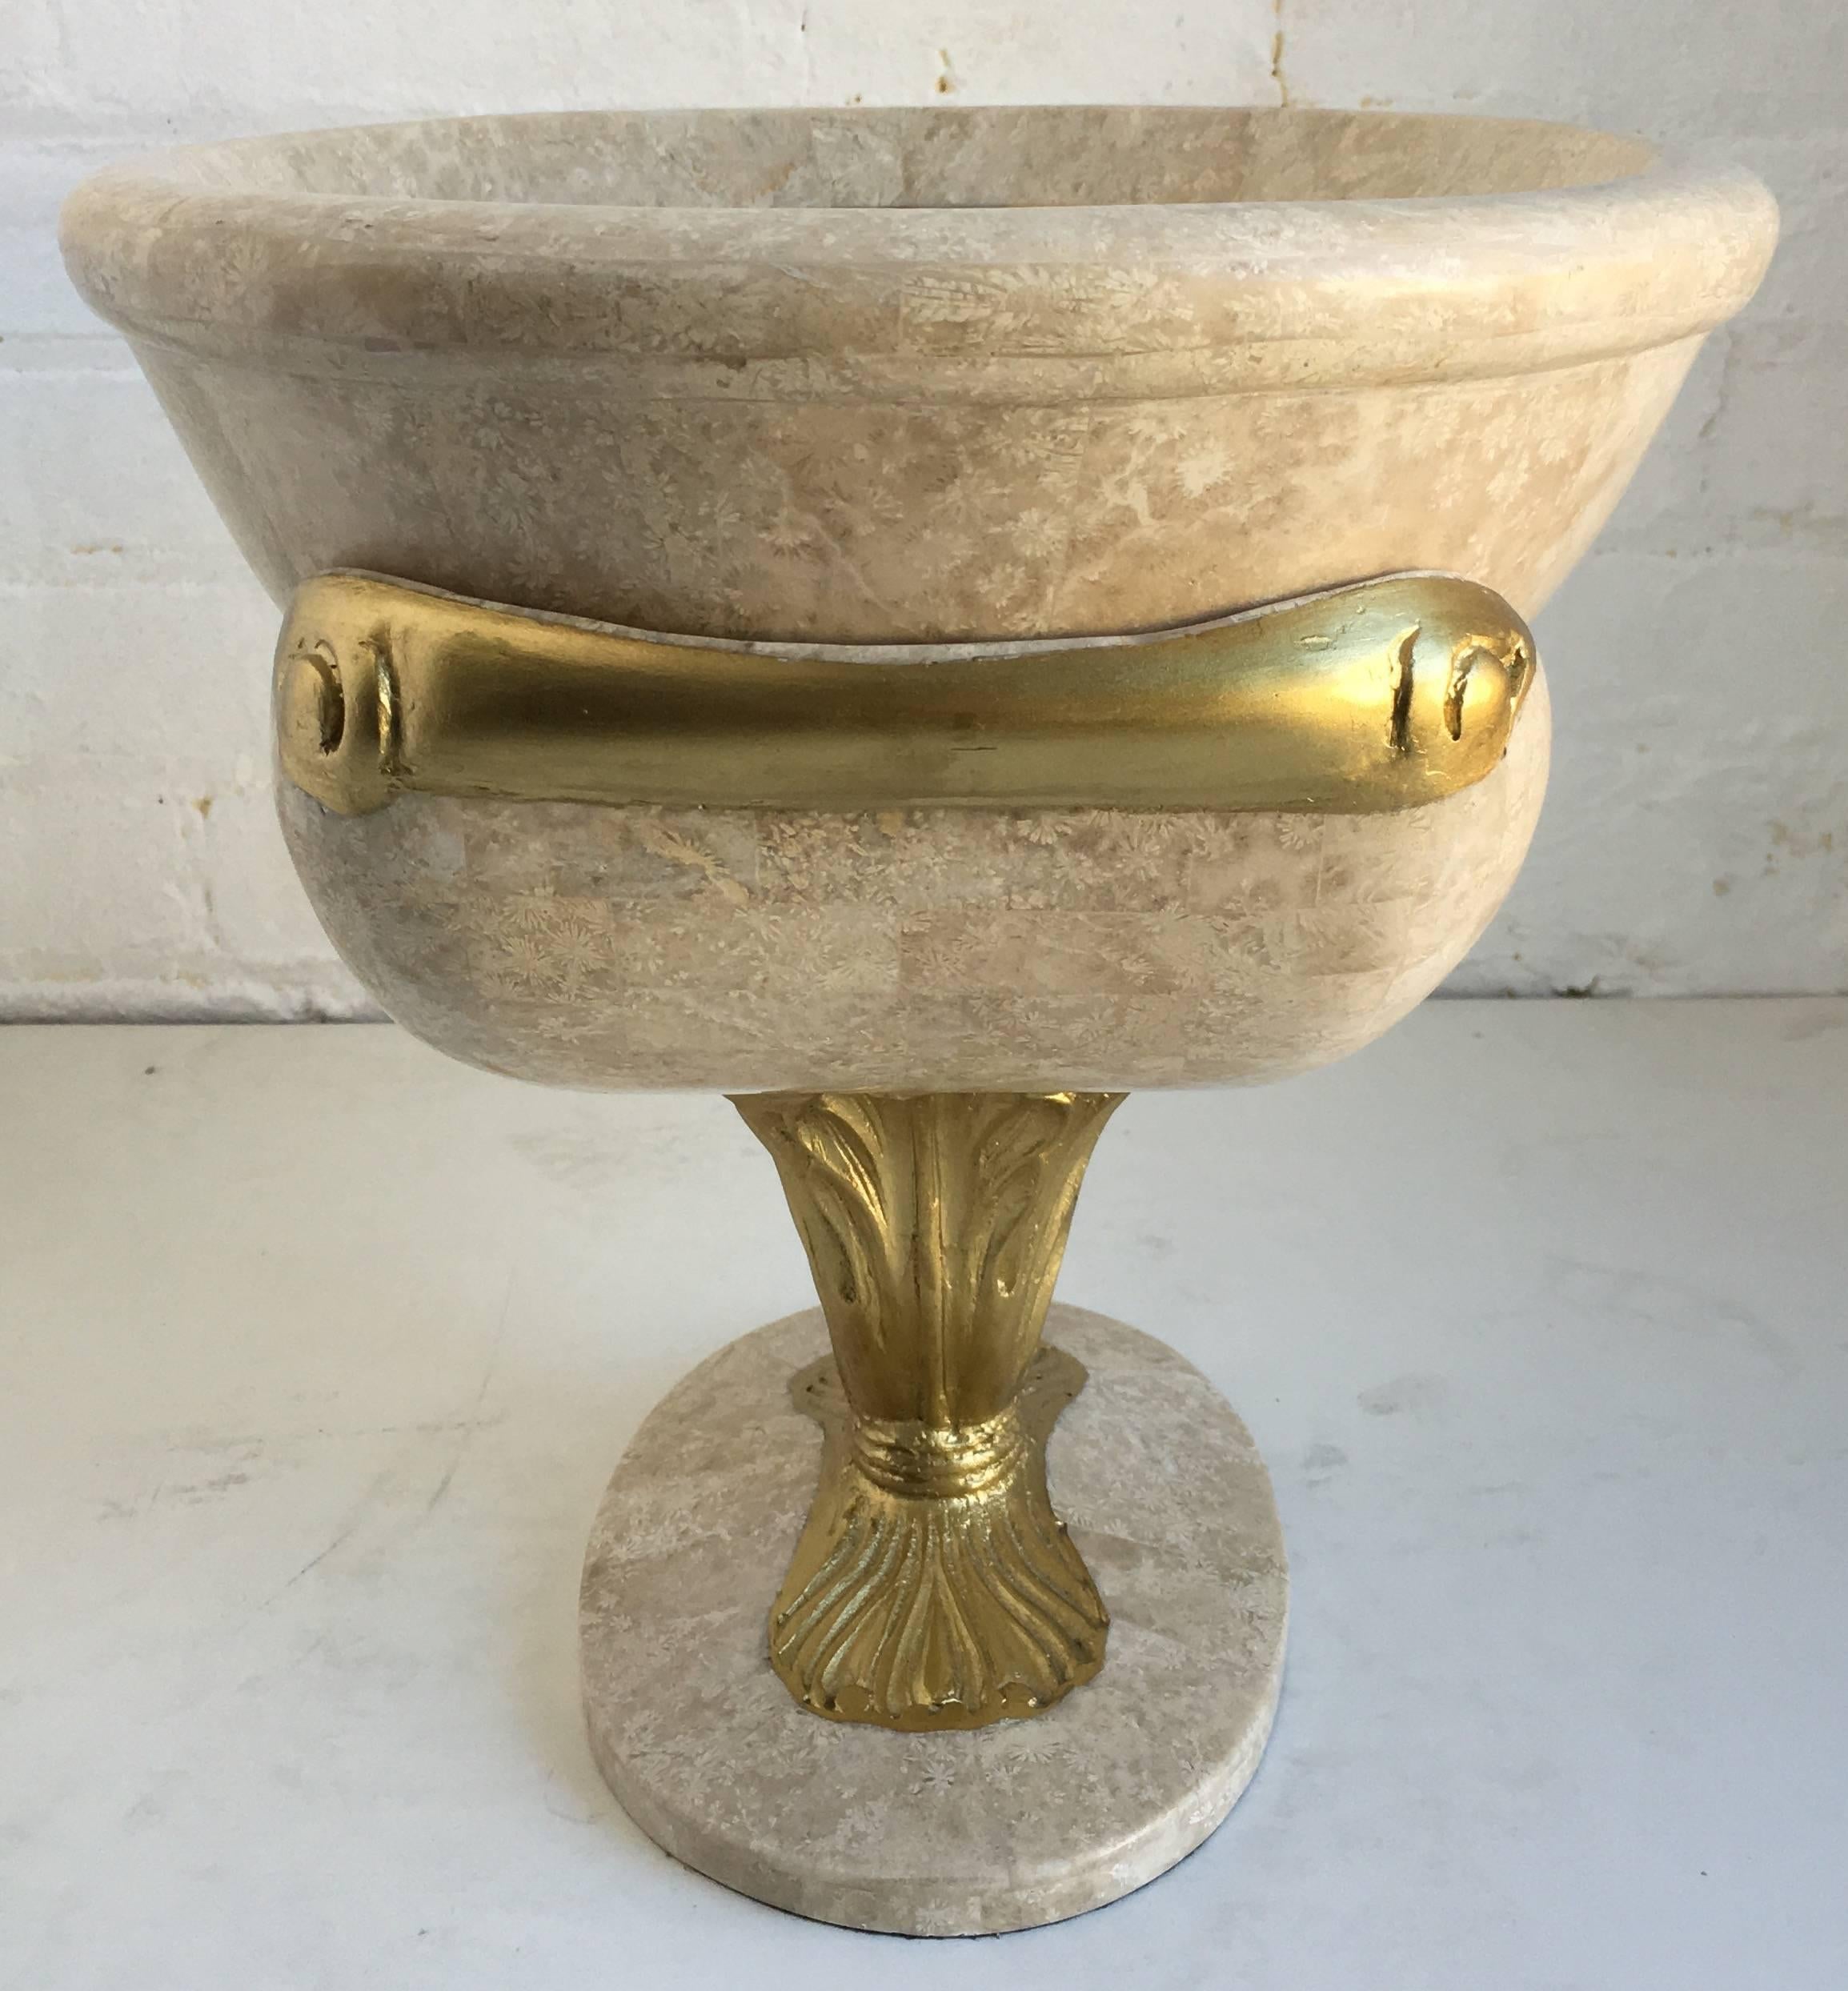 Decorative tessellated stone footed centerpiece urn with gold painted detailing and brass inlay. Removable oval shaped bowl/dish supported on curved sculptural base. In the style of Maitland Smith.